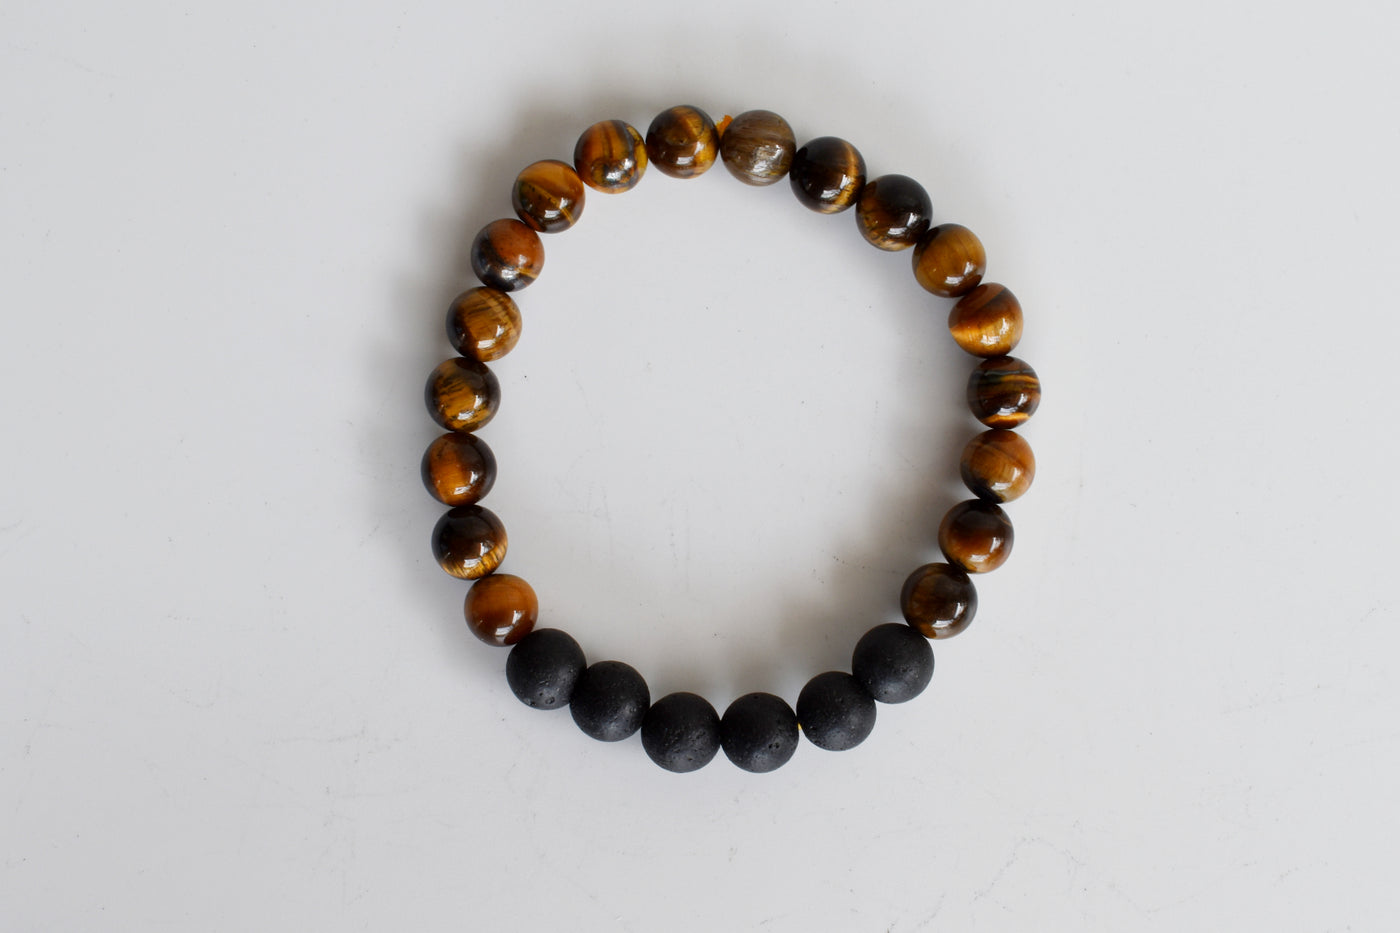 Tiger Eye Diffuser Bracelet, Lava Diffuser Jewelry, Aromatherapy, Essential Oil Bracelet, Spiritual Gift, Yoga Gift for Her